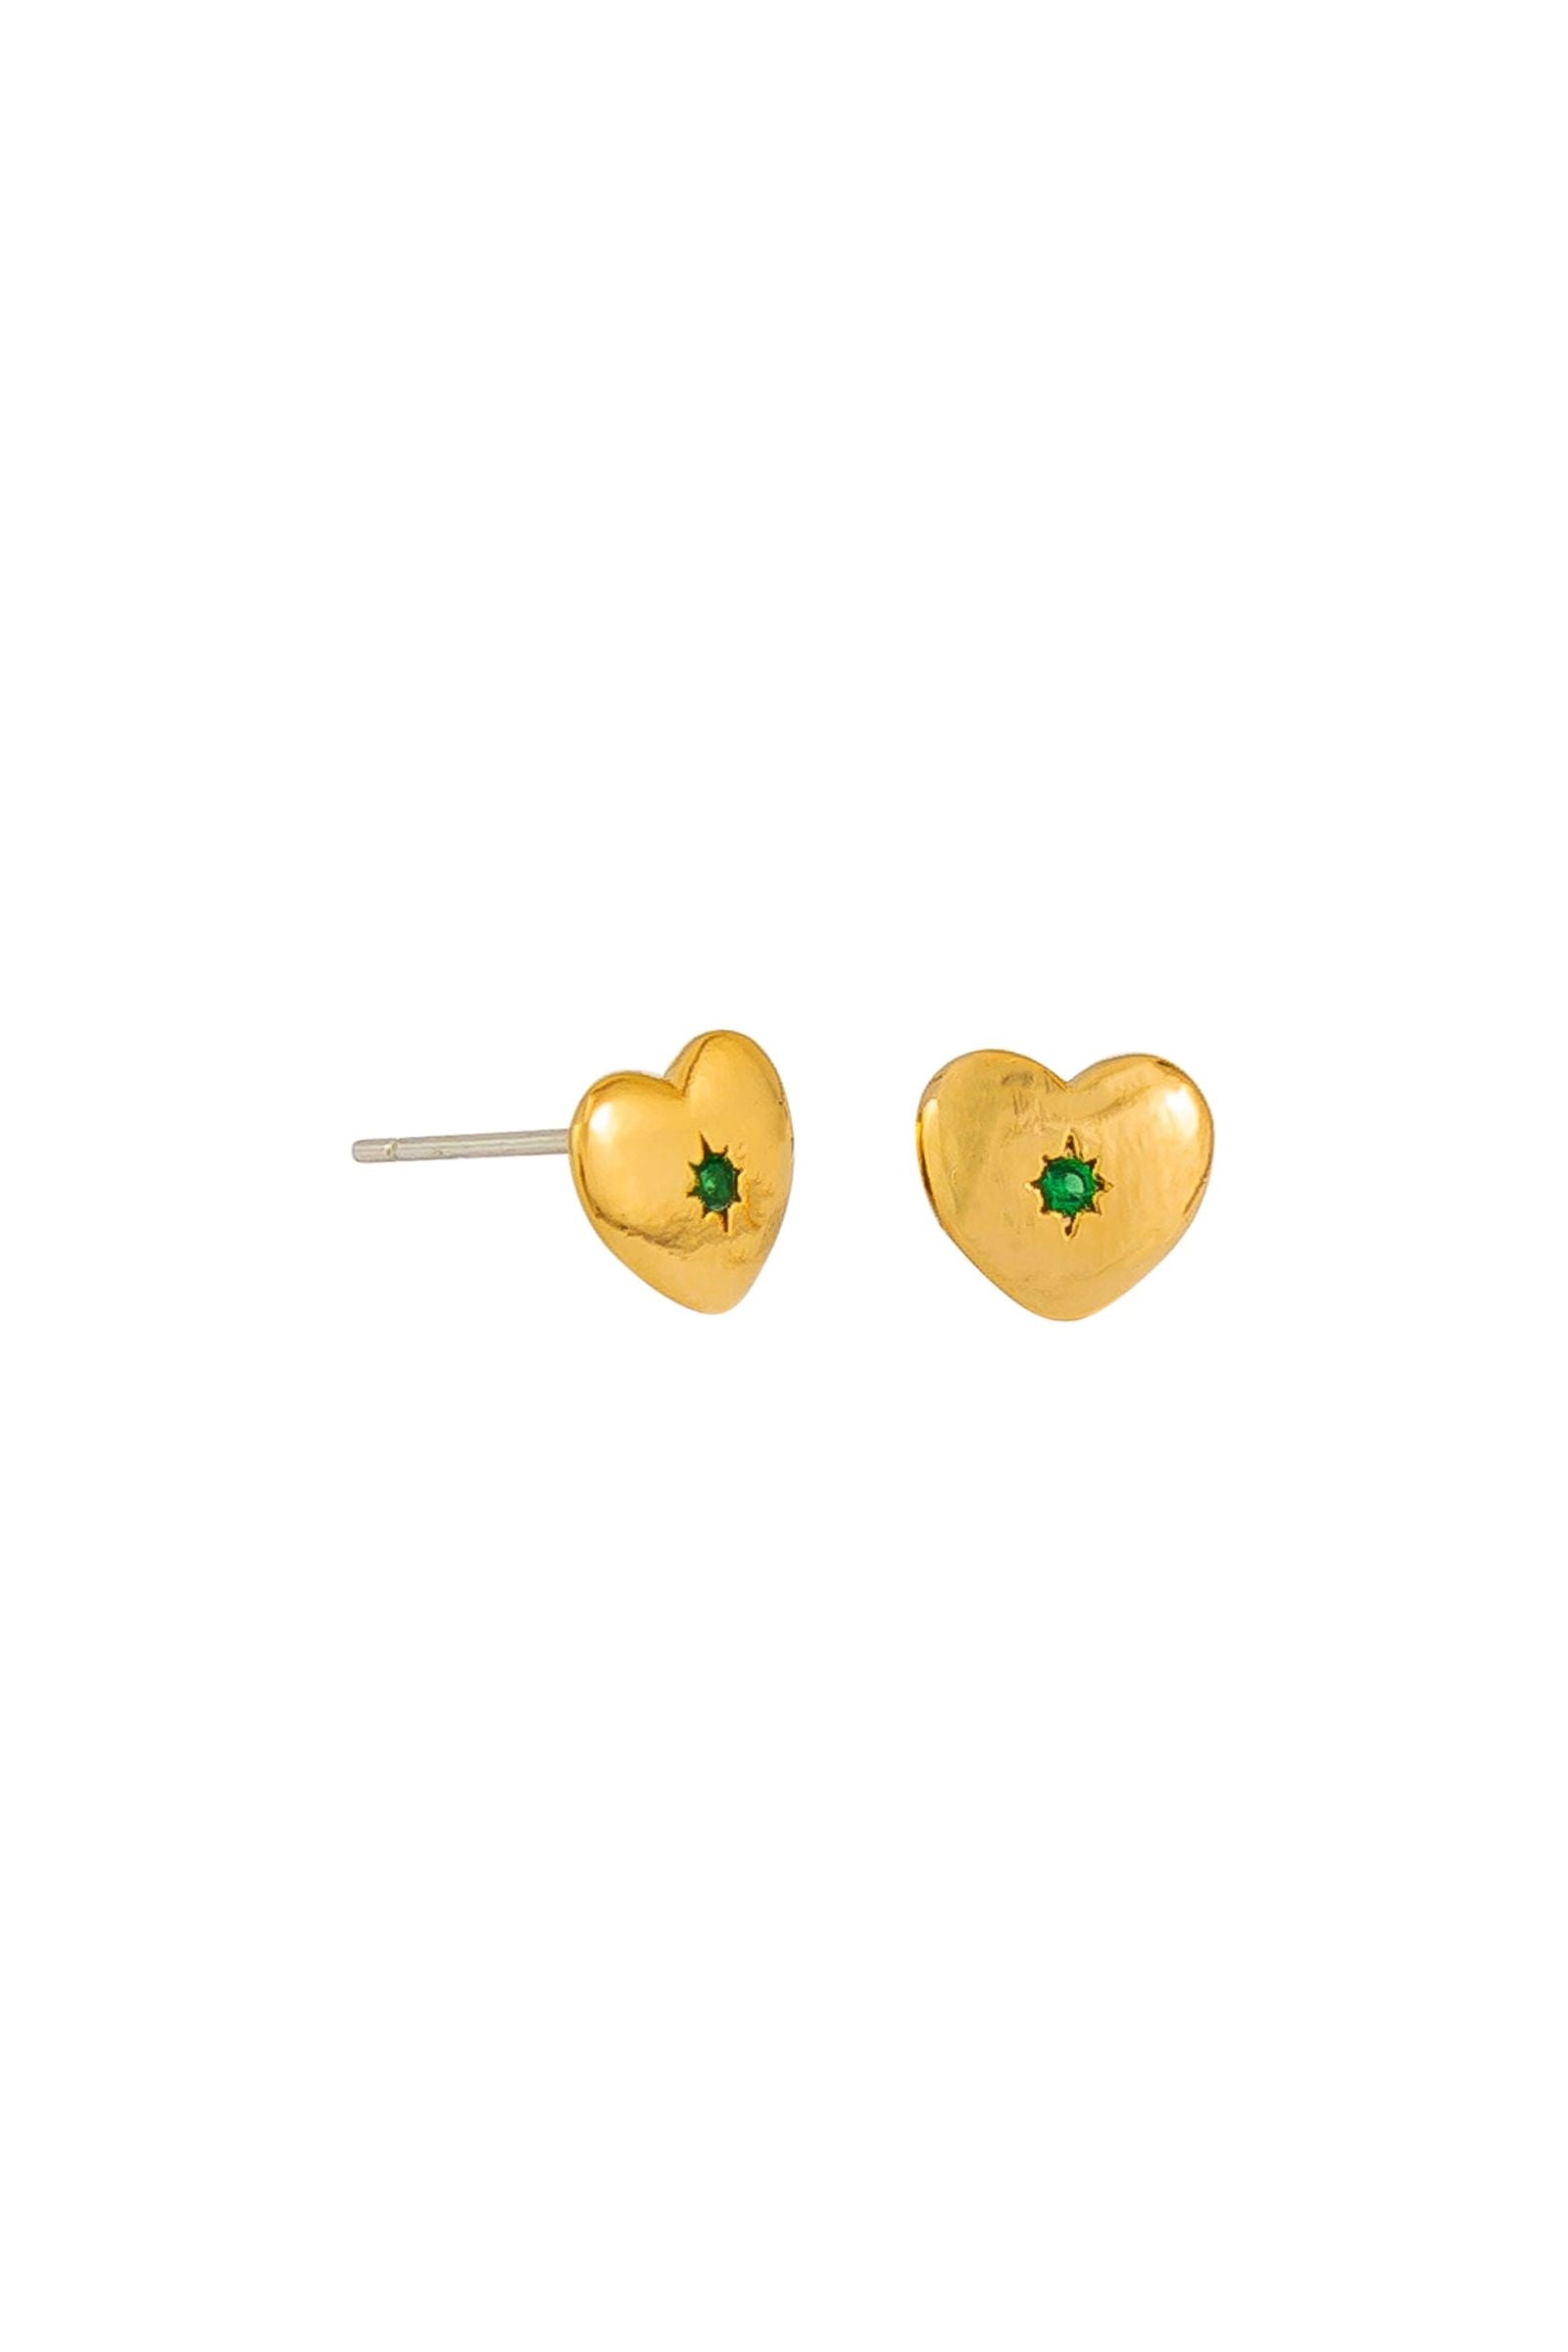 Gold Heart with green stone earrings